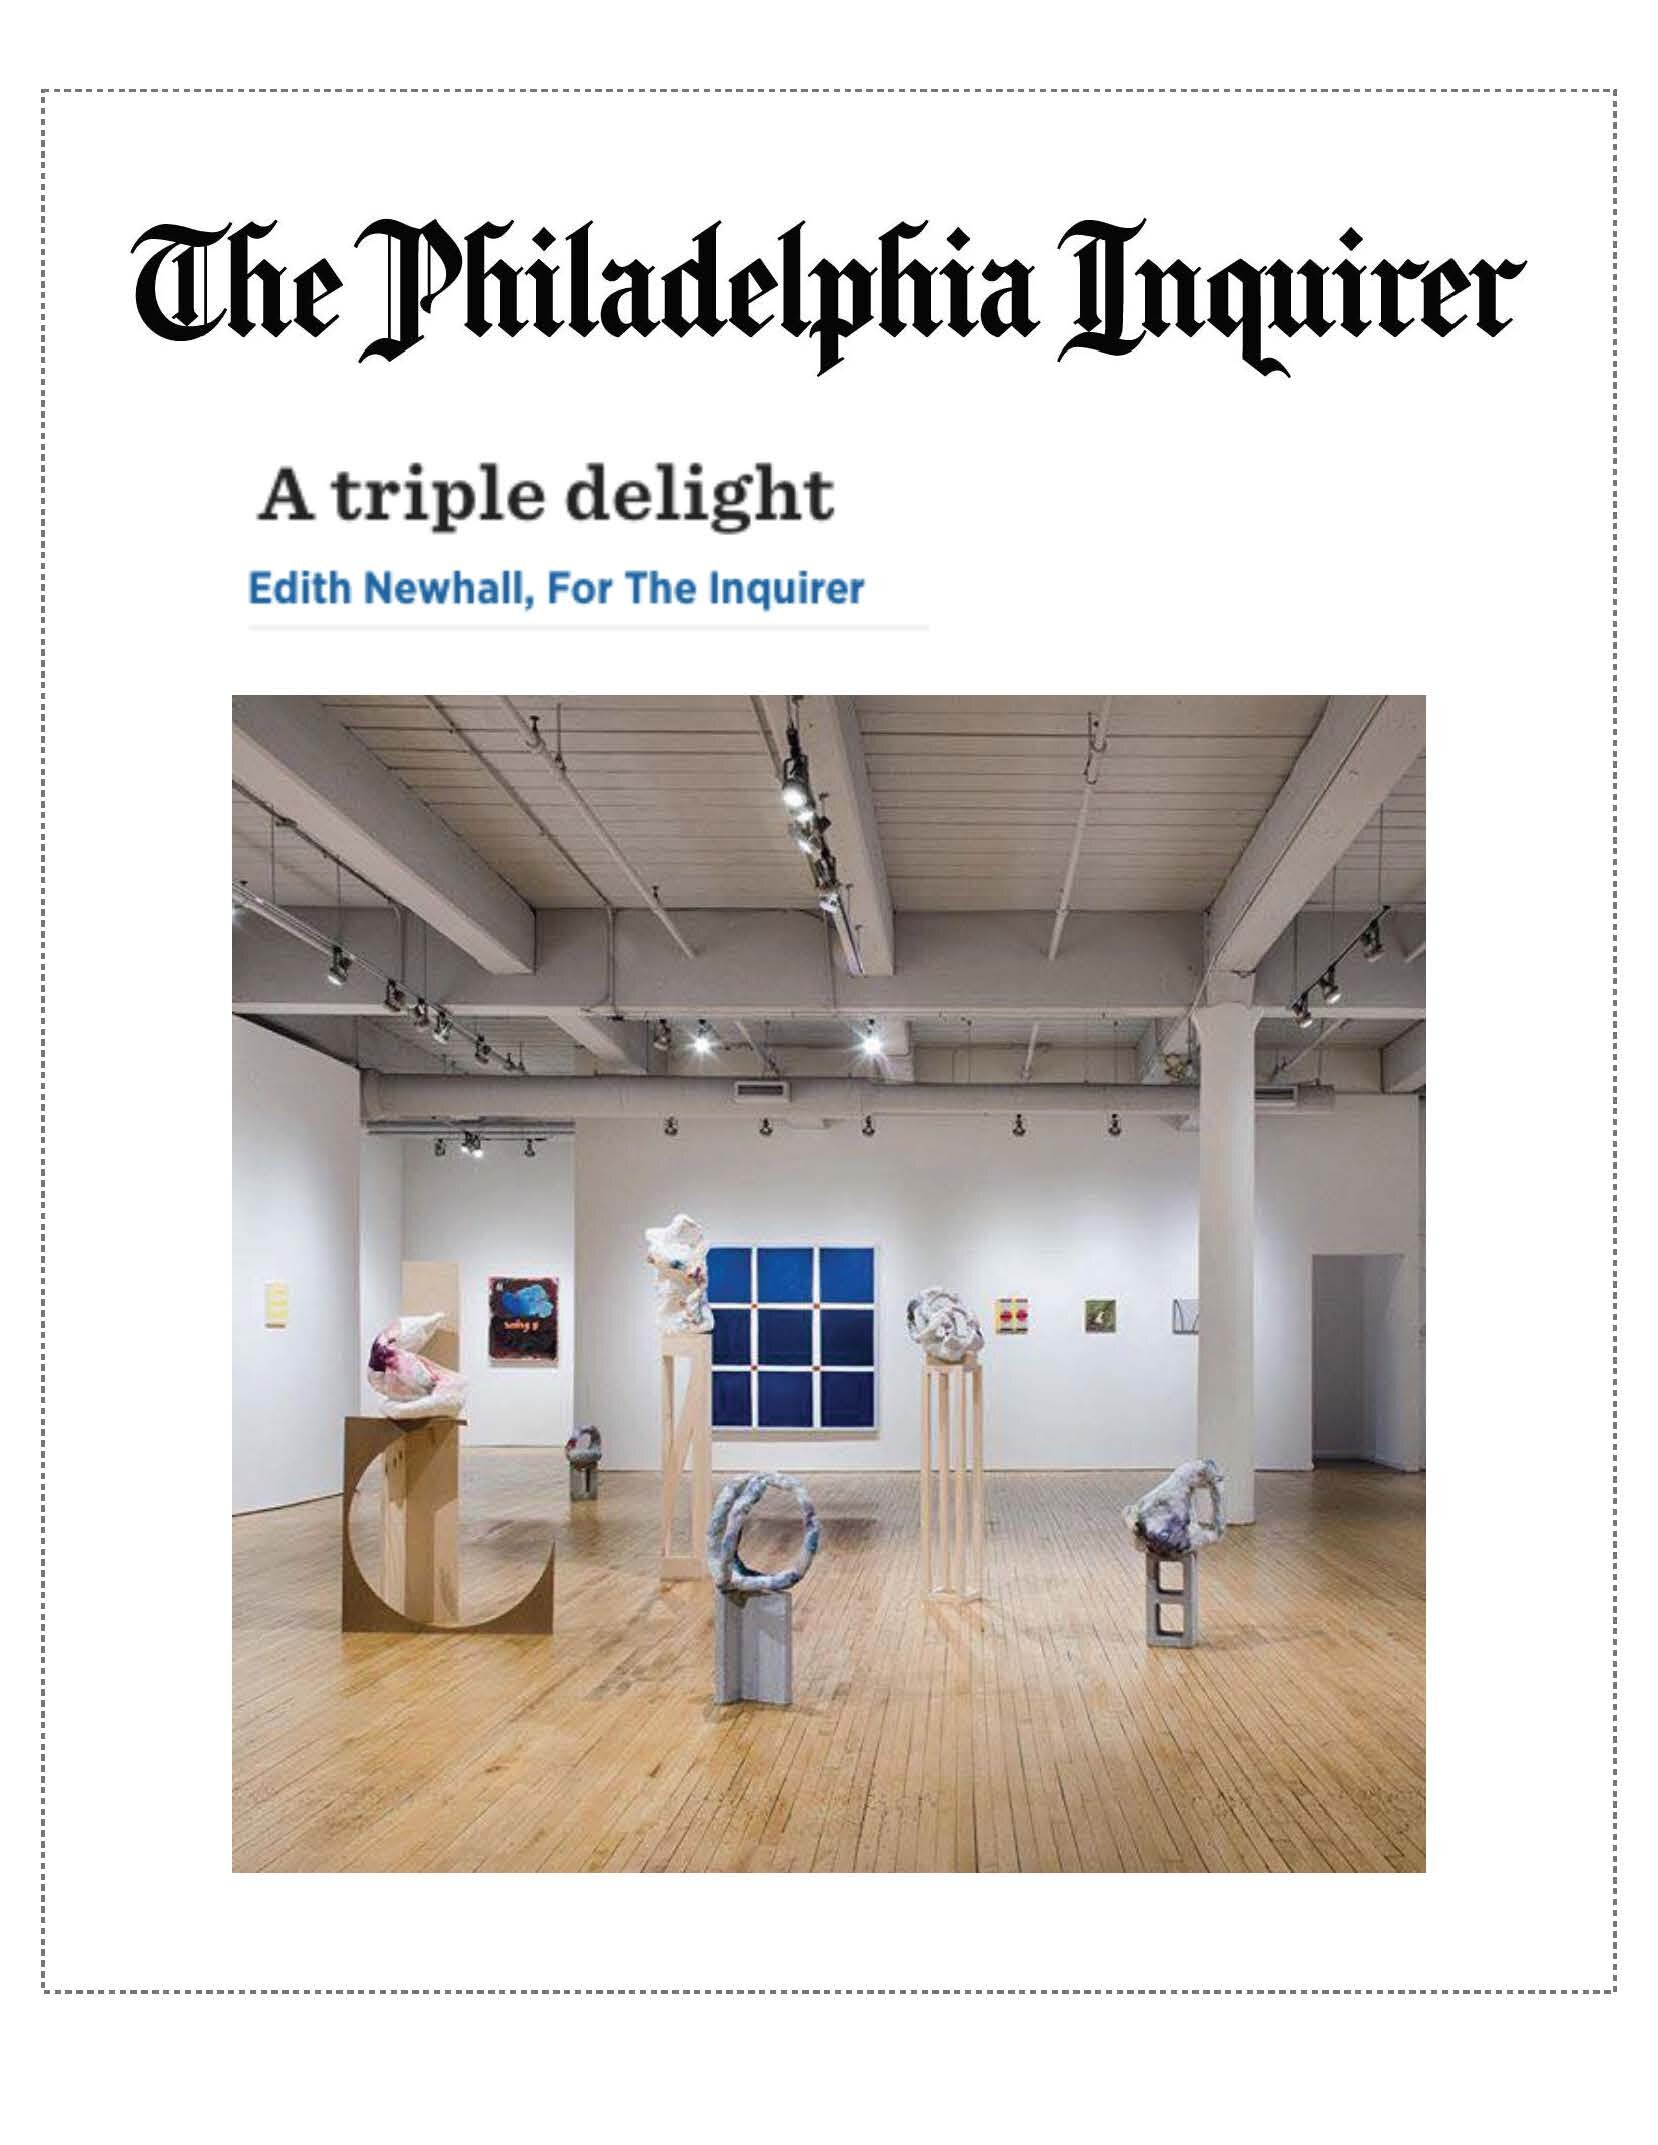 The Philadelphia Inquirer_A Triple Delight_Page.jpg